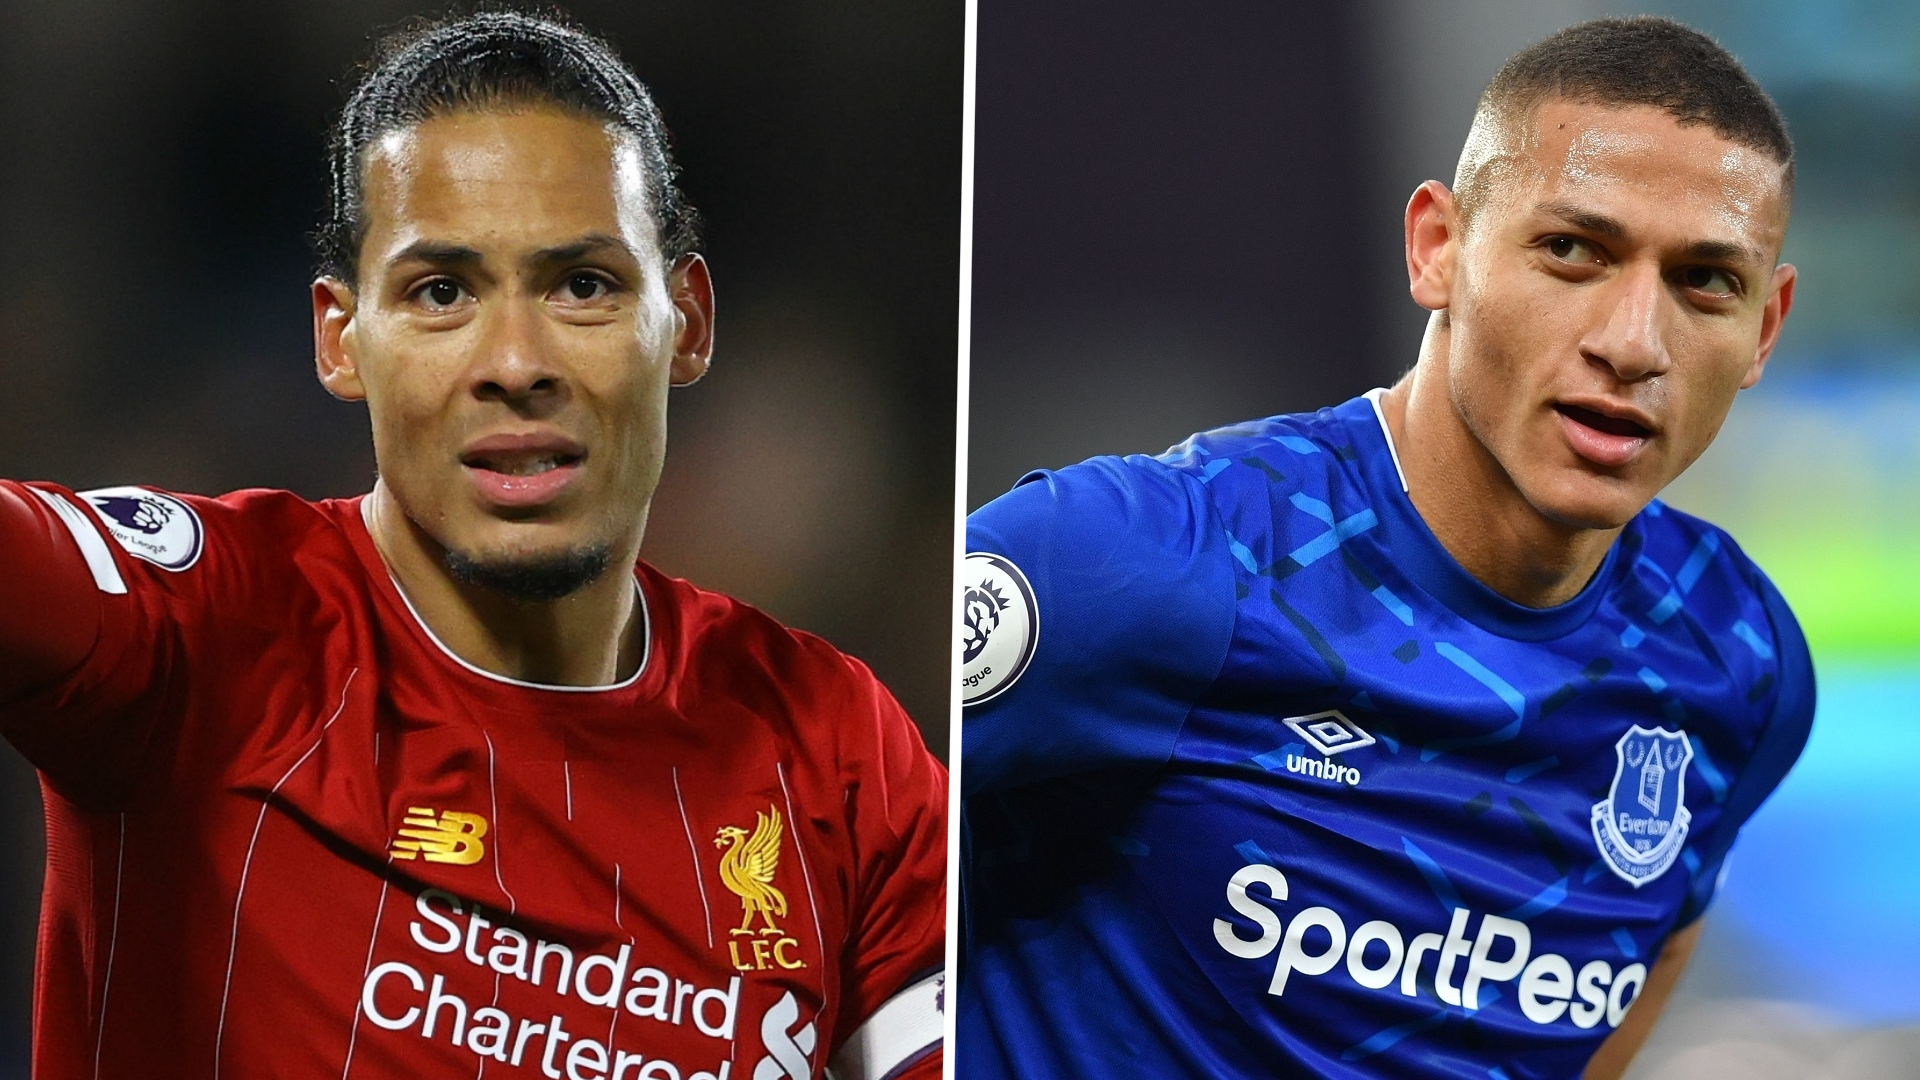 'There are better defenders' - Richarlison takes shot at Van Dijk ahead of Merseyside derby